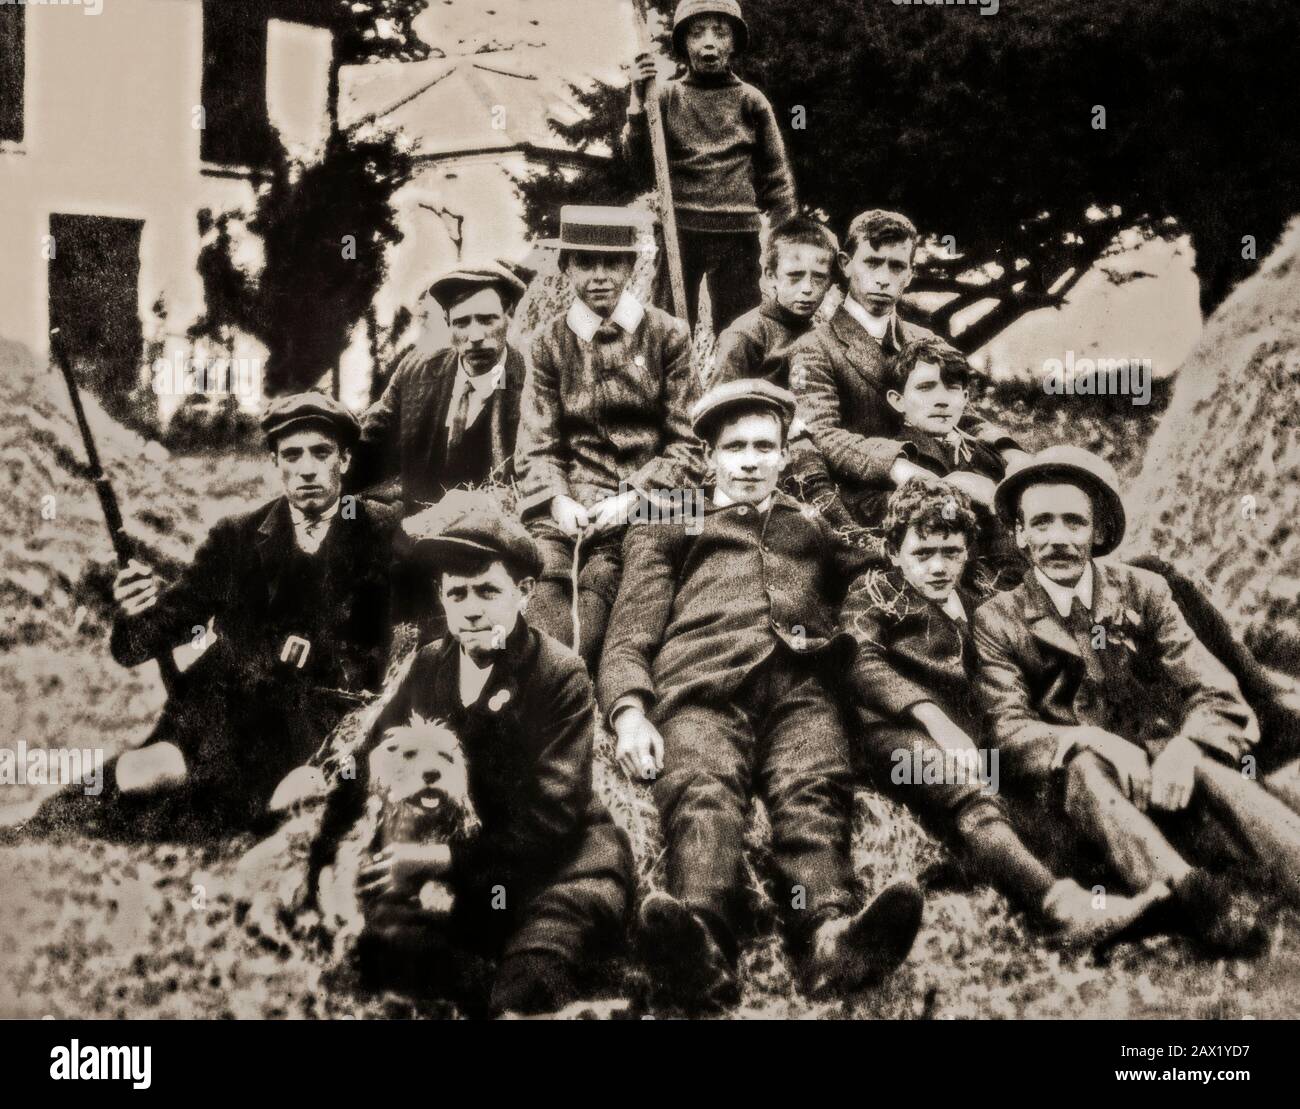 A group of The Irish Volunteers (Irish: Óglaigh na hÉireann), ar a North Dublin training camp. It was a military organisation established in 1913 by Irish nationalists, ostensibly in response to the formation of the Ulster Volunteers in 1912, and its declared primary aim was 'to secure and maintain the rights and liberties common to the whole people of Ireland'. Increasing rapidly to a strength of nearly 200,000 by mid-1914, it split in September of that year over John Redmond's commitment to the British War effort, with the smaller group retaining the name of 'Irish Volunteers'. Stock Photo